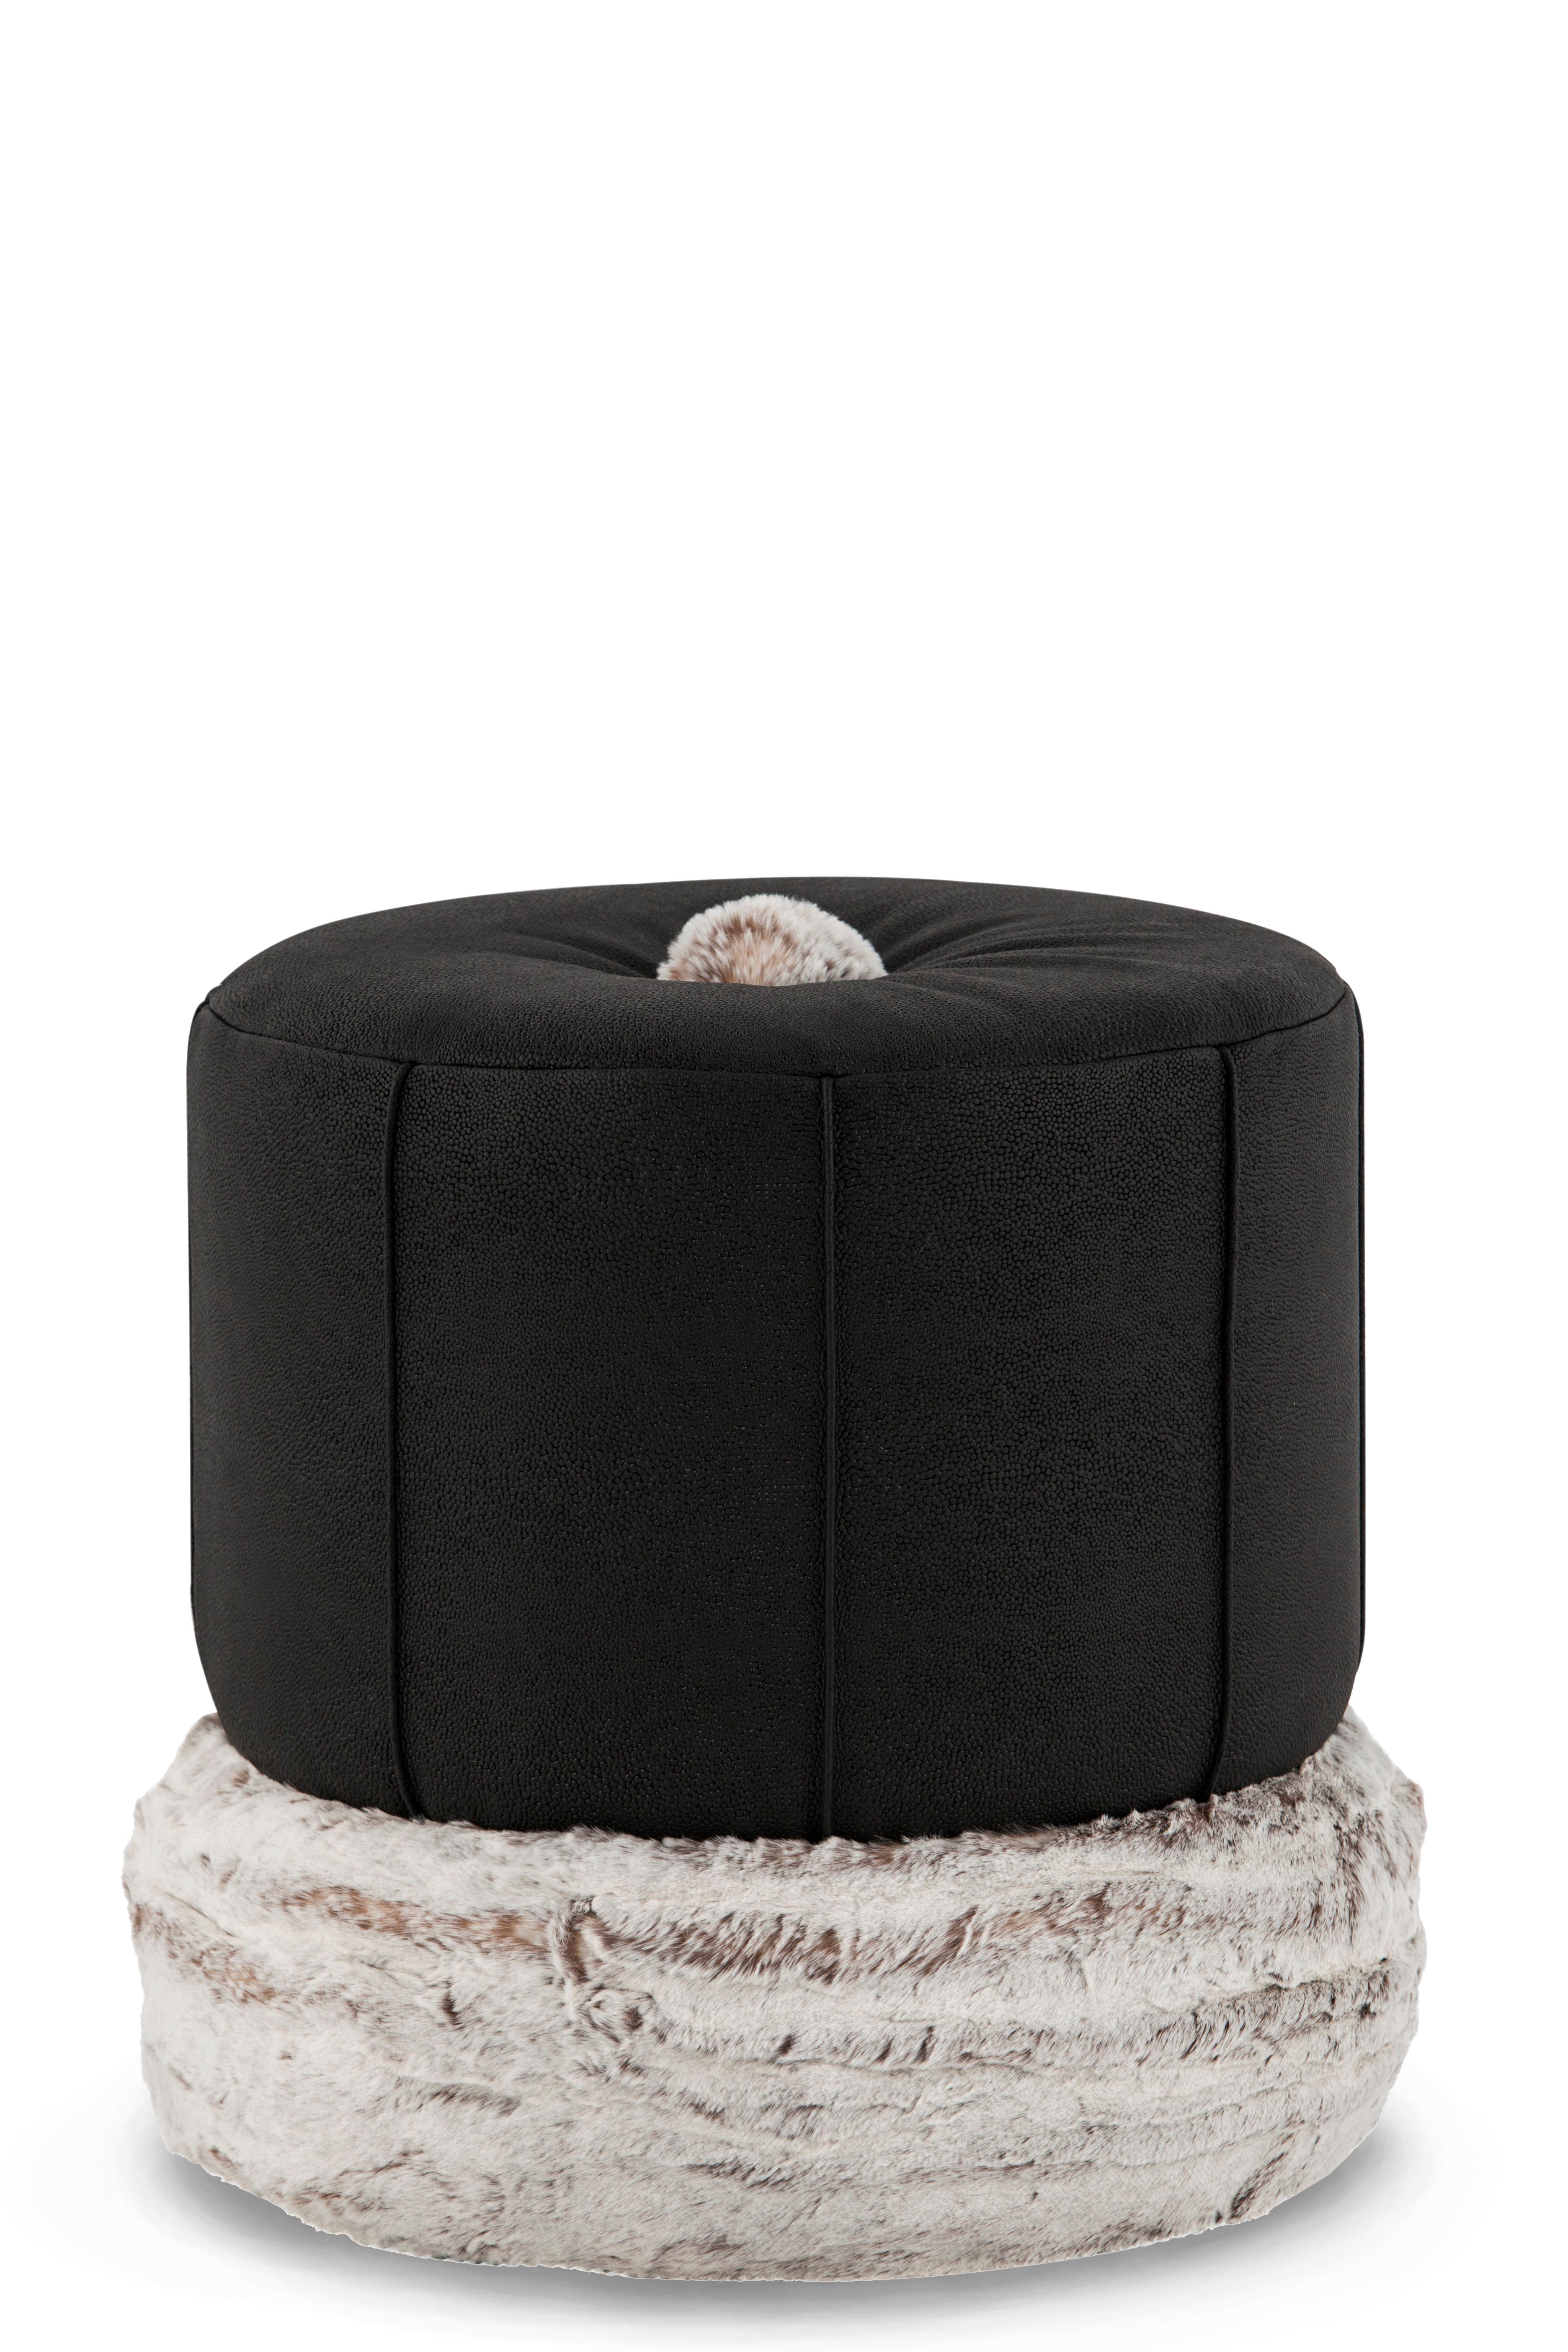 Adonis Pouf, Modern Collection, Handcrafted in Portugal - Europe by GF Modern.

A comfy pouf stool with a Mediterranean touch. Upholstered in black Italian leather and pearl faux fur, Adonis matches its name. Destined to beautify in any of its